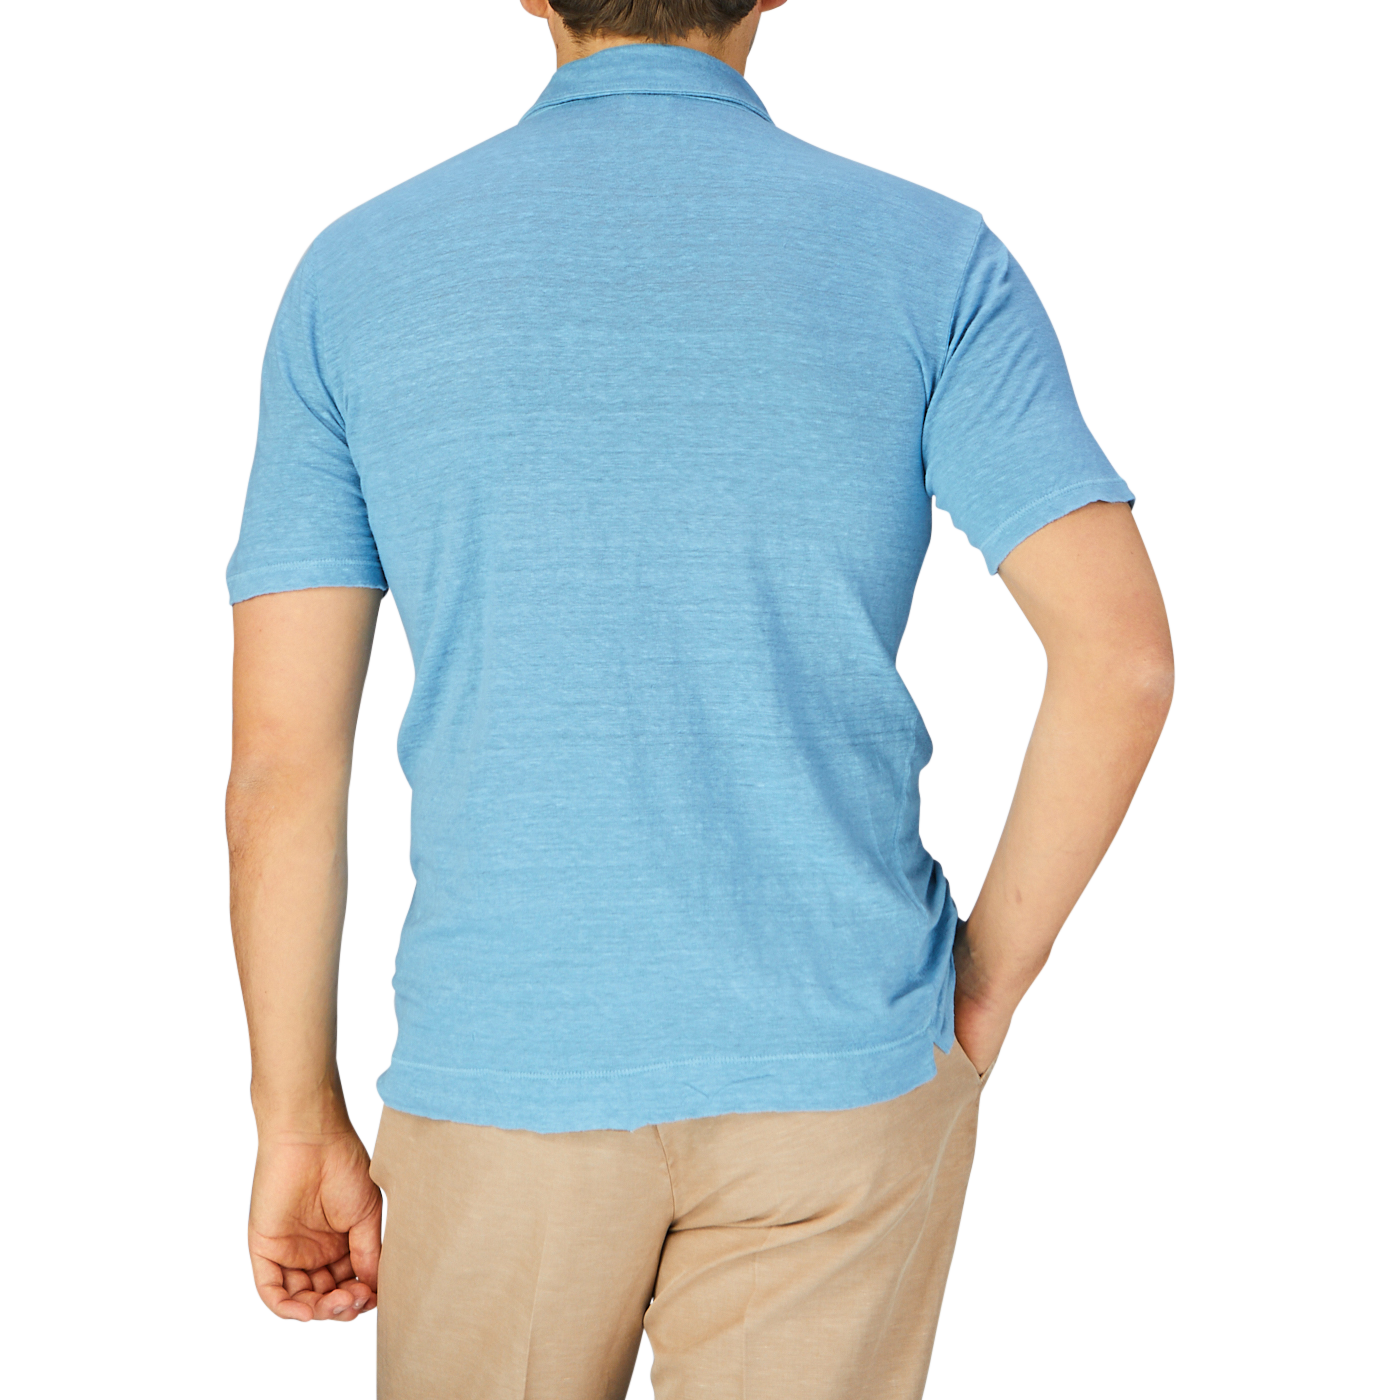 Rear view of a man wearing an Aqua Blue Linen Polo Shirt by Massimo Alba and beige trousers standing against a grey background.